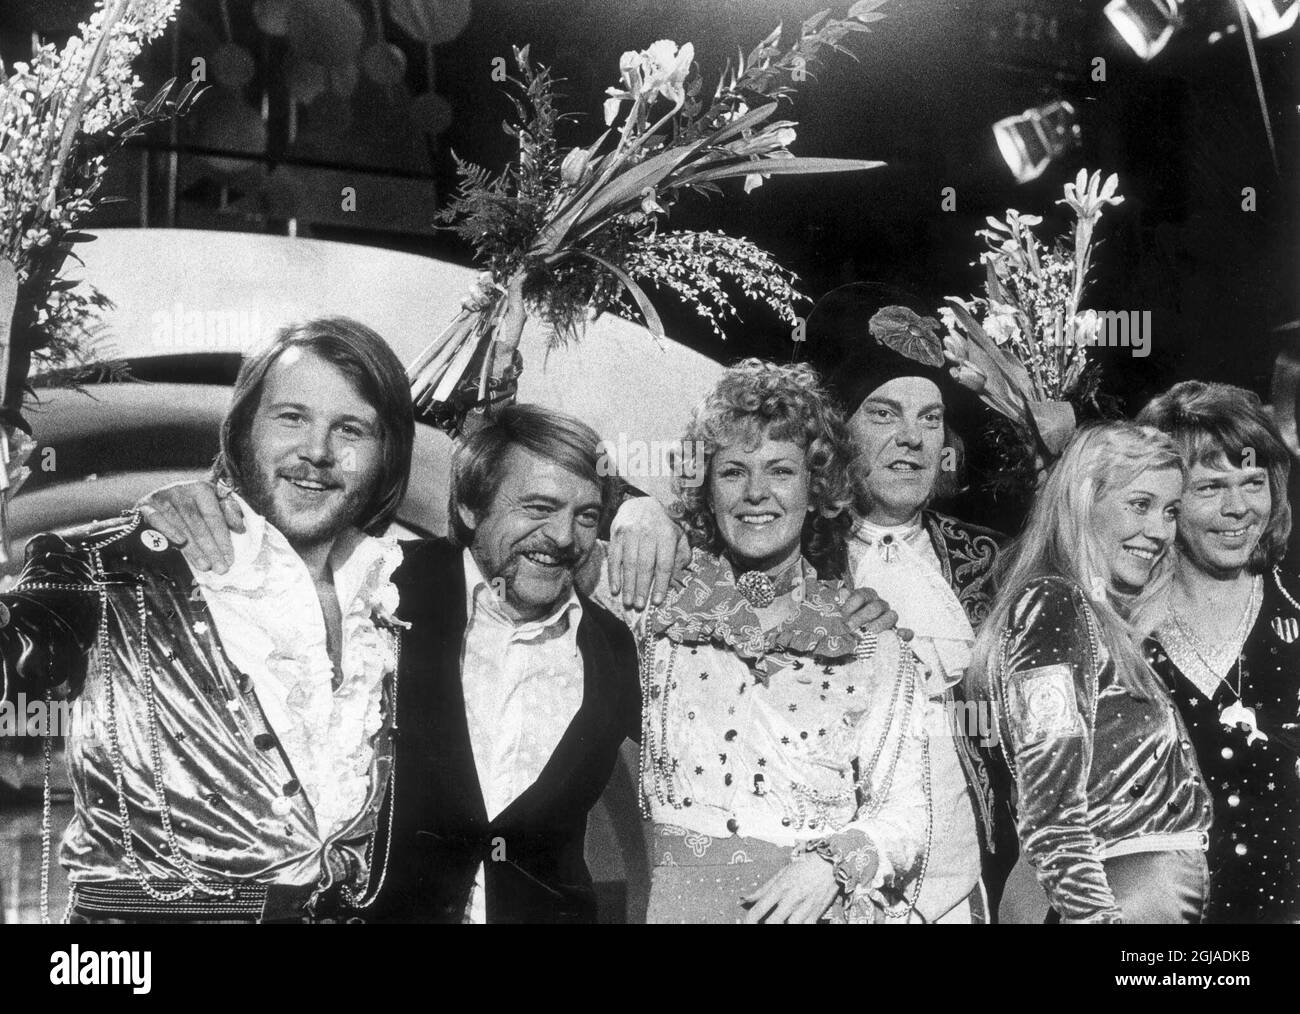 (FILES) A 1974 file photo showing Stig 'Stikkan' Andersson (2-L) with Swedish pop group 'ABBA', Benny Andersson (L), Annifrid Lyngstad (C-L), conductor Sven-Olof Walldoff (C-R), Agnetha Faltskog (2-R) and Bjorn Ulvaeus after winning the Eurovision Song Contest in Brighton, England. Andersson, who produced the records Swedish pop group ABBA that topped the charts around the globe during the 1970's and 1980's, died of a heart attack 12 September, aged 66. Scanpix Code 20360 Stock Photo